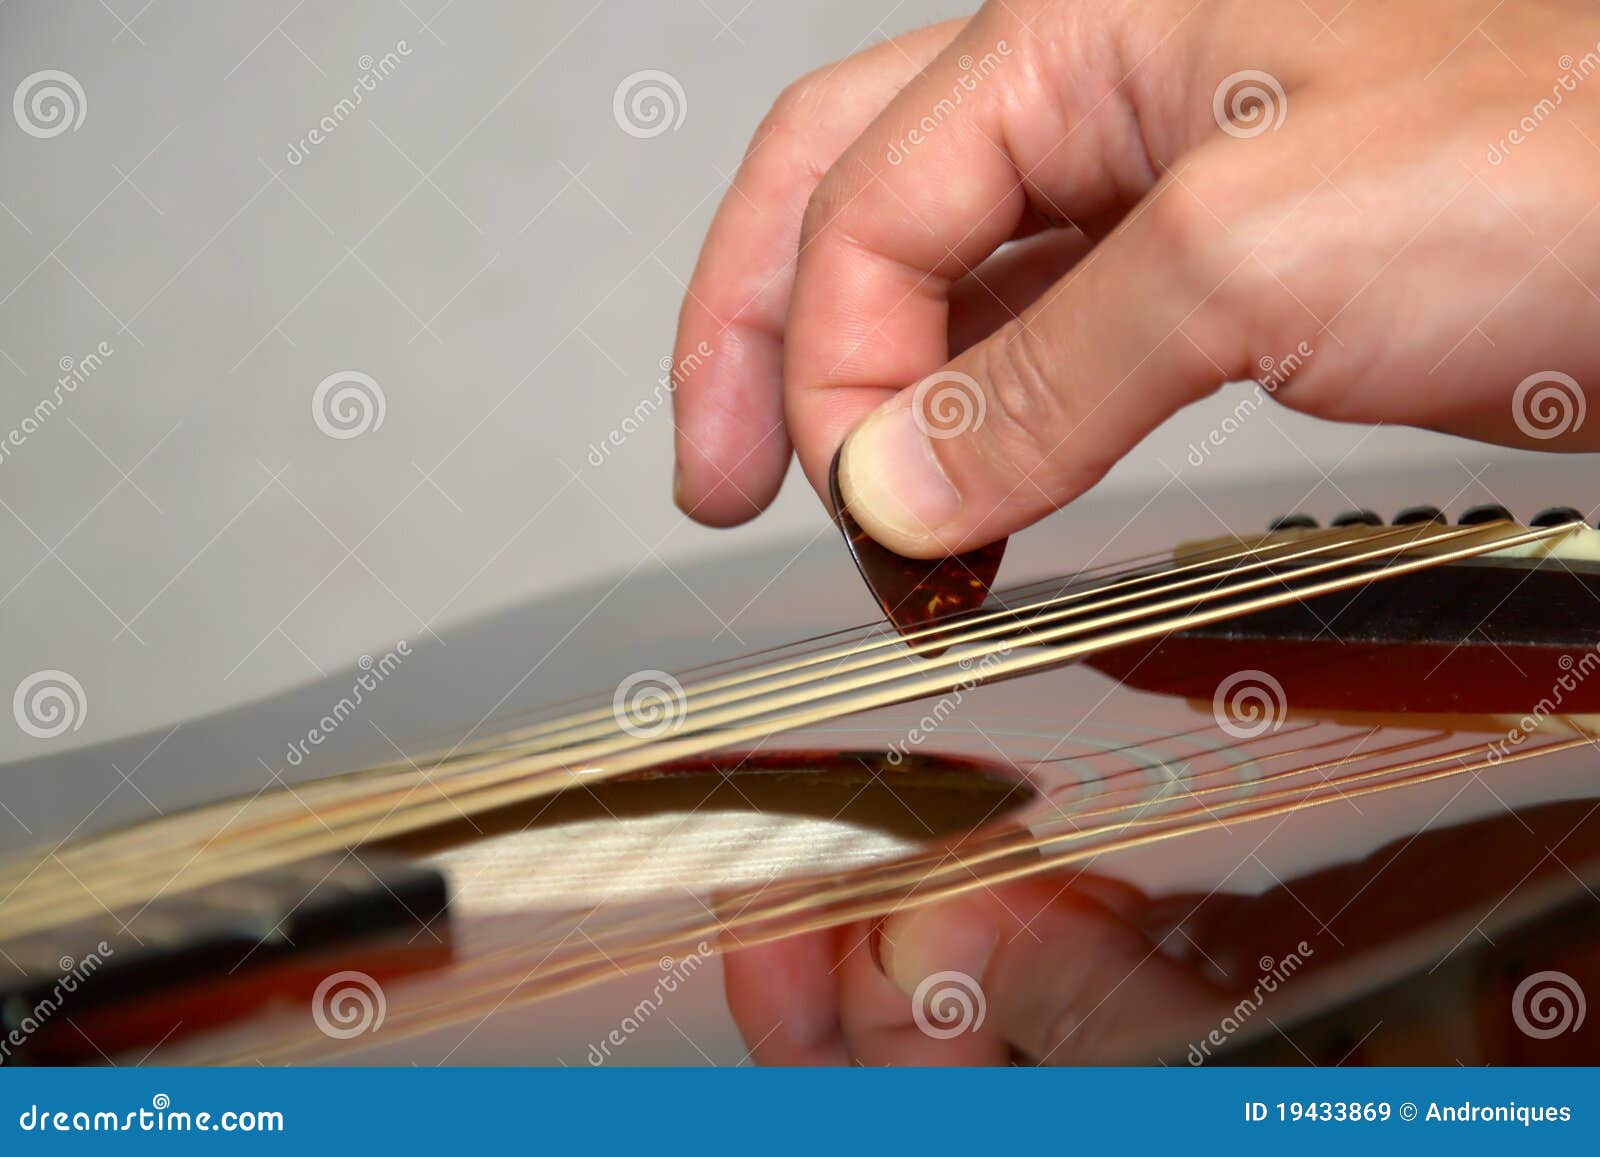 playing acoustic guitar: hand with pick on strings